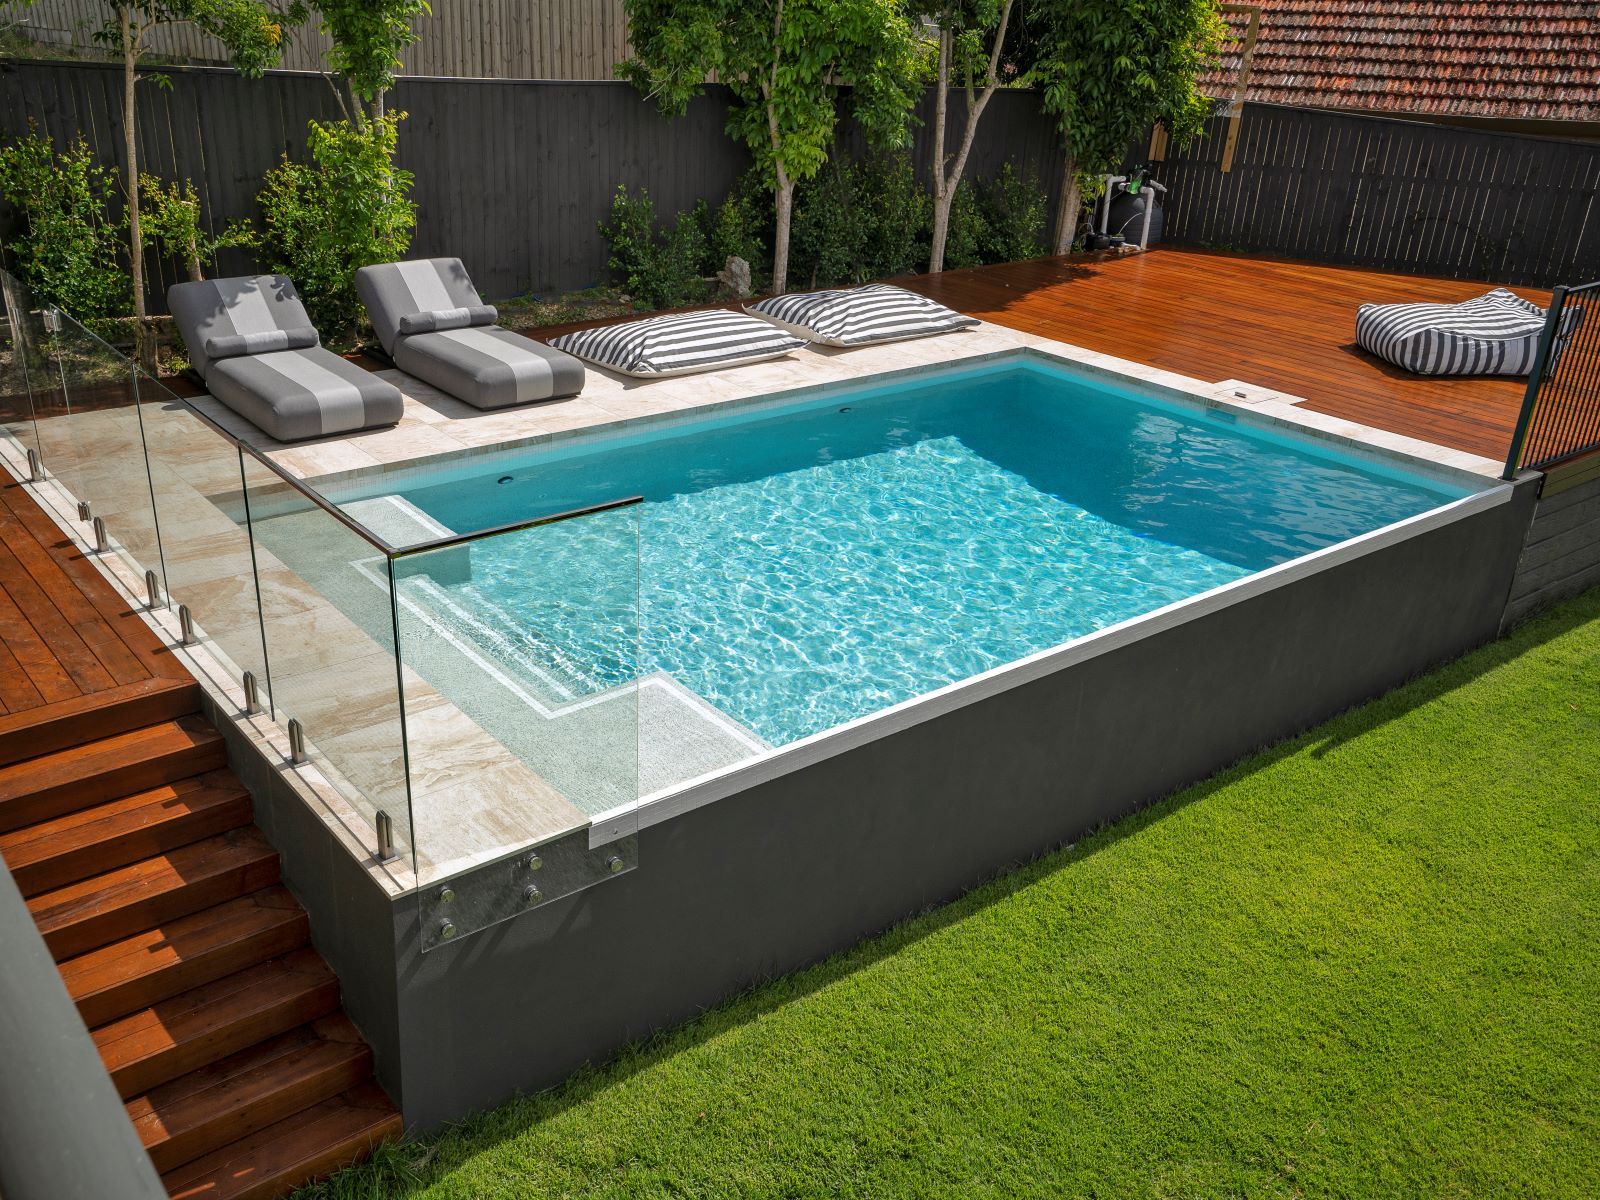 Latte Marblano Porcelain pool coping and surrounds with Urban White ceramic waterline tile